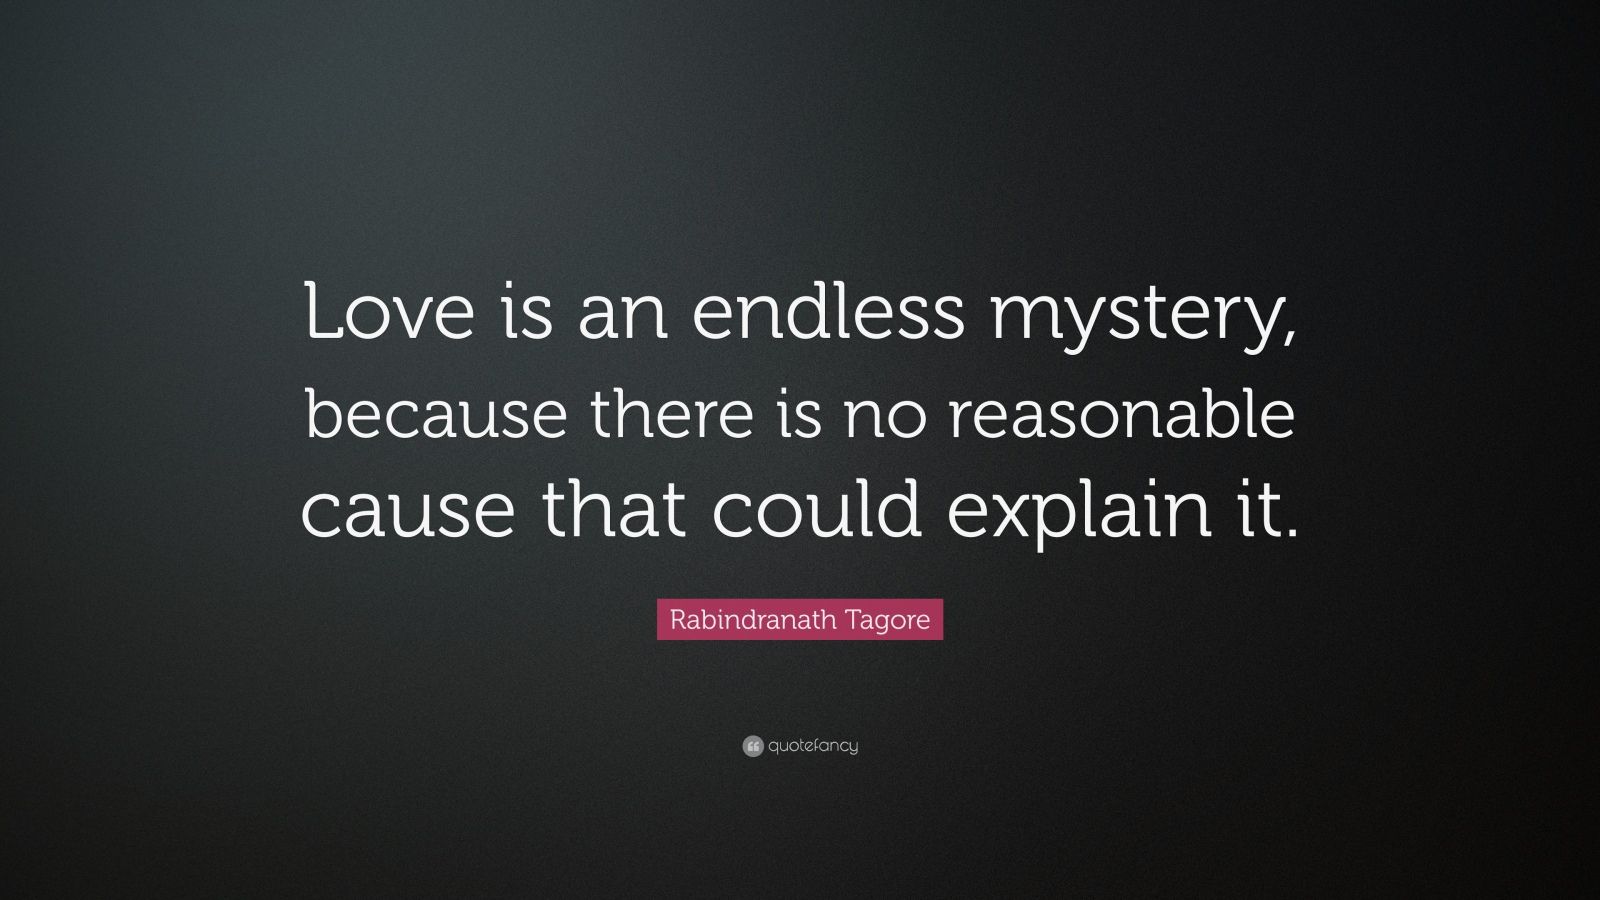 Sad Love Quotes By Rabindranath Tagore Love does not claim possession but give by rabindranath